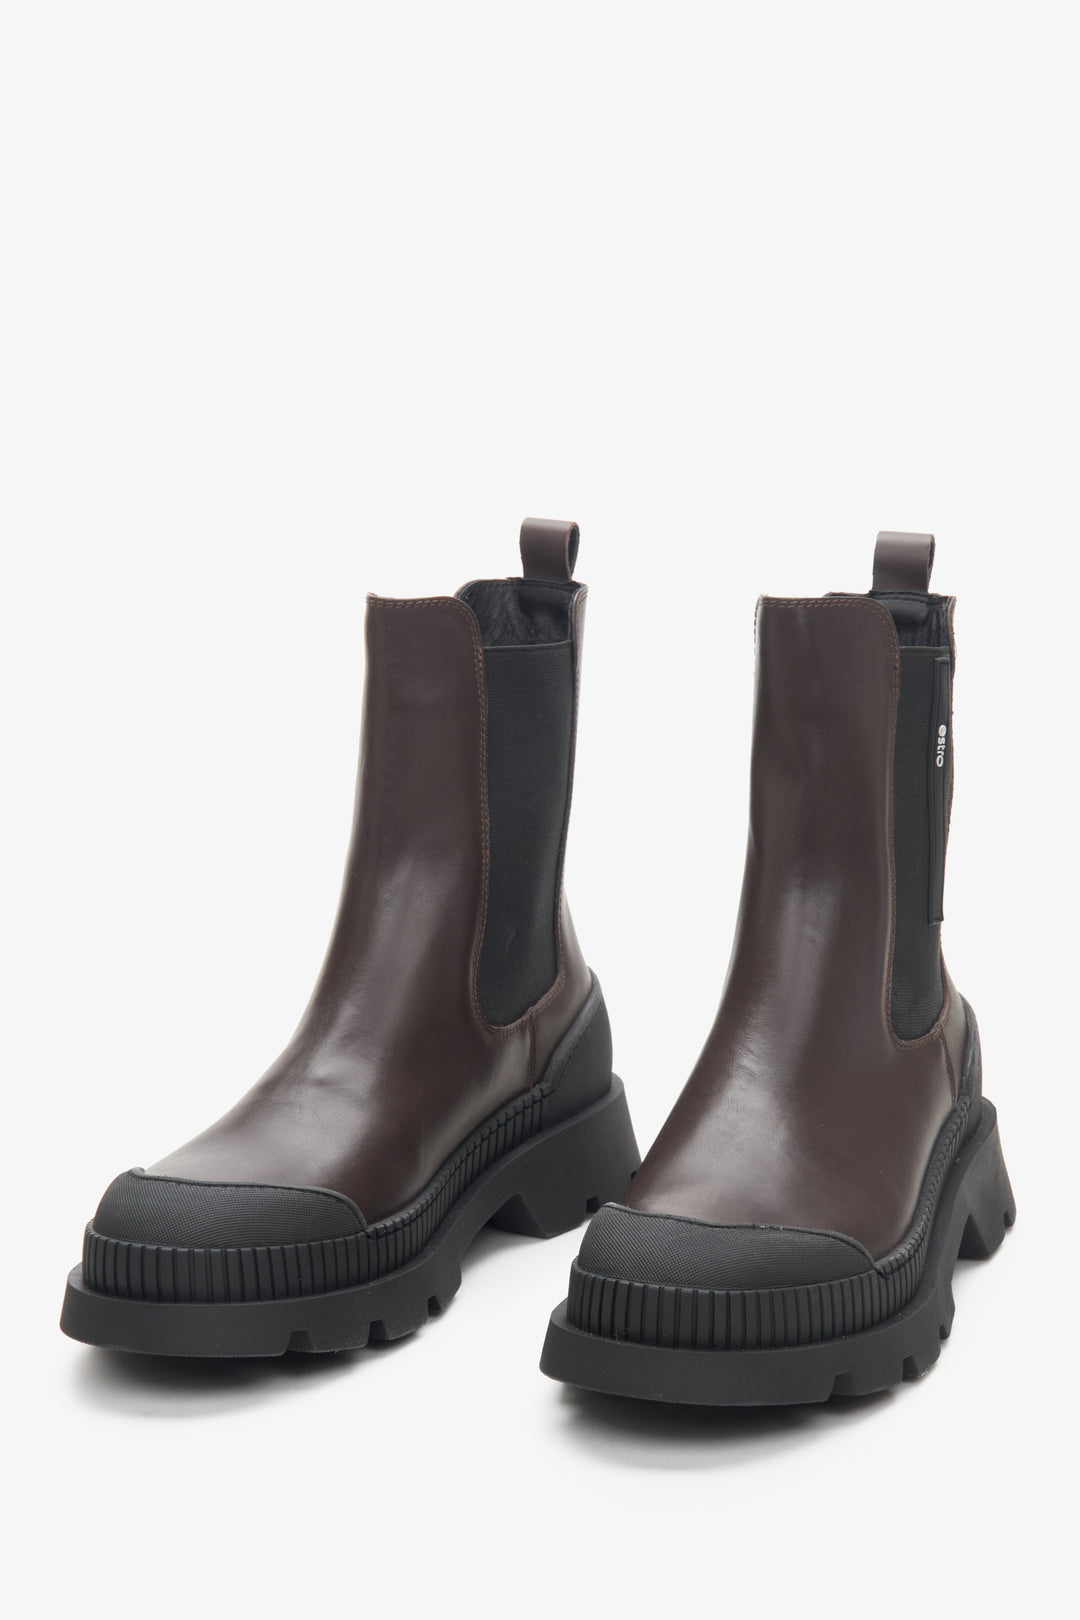 Estro women's genuine leather Chelsea boots in grey and black - front view presentation.